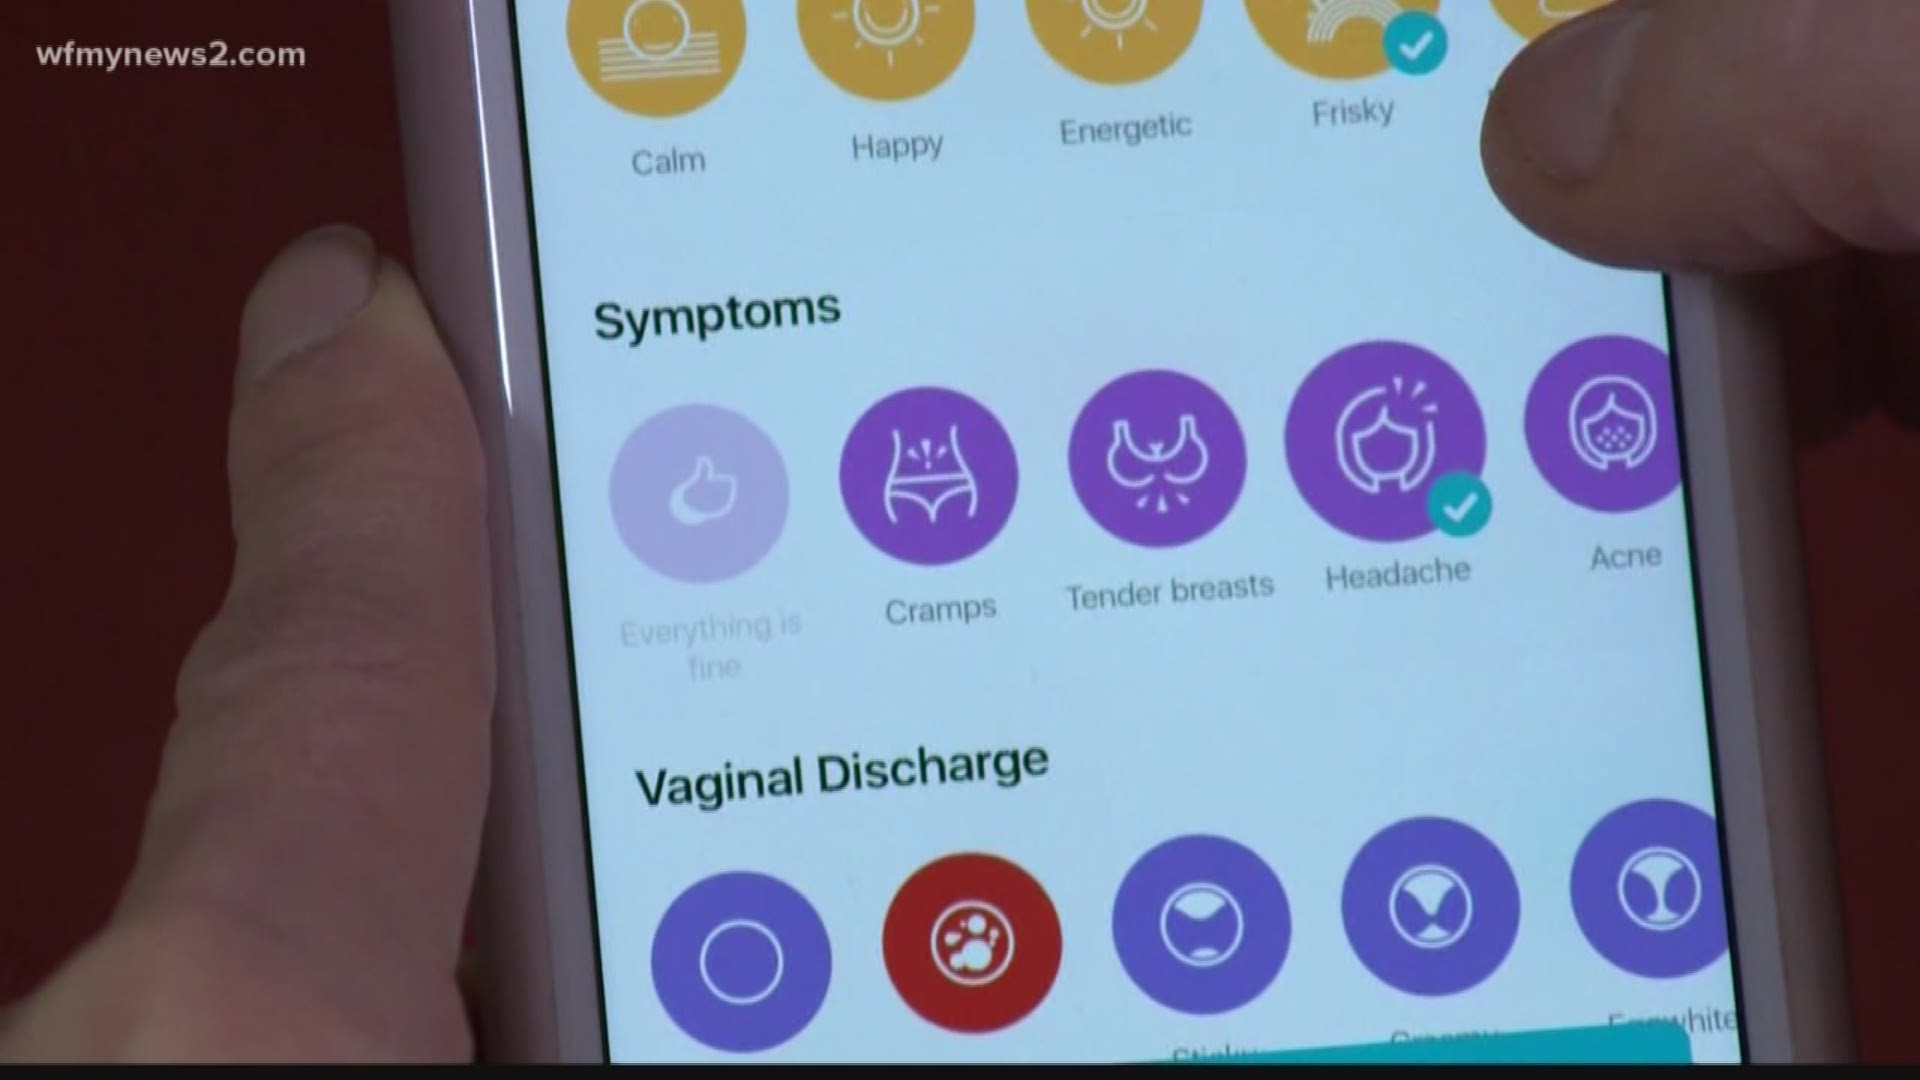 The apps help track menstrual cycles, sexual activity, and more, but what exactly are companies doing with that information?